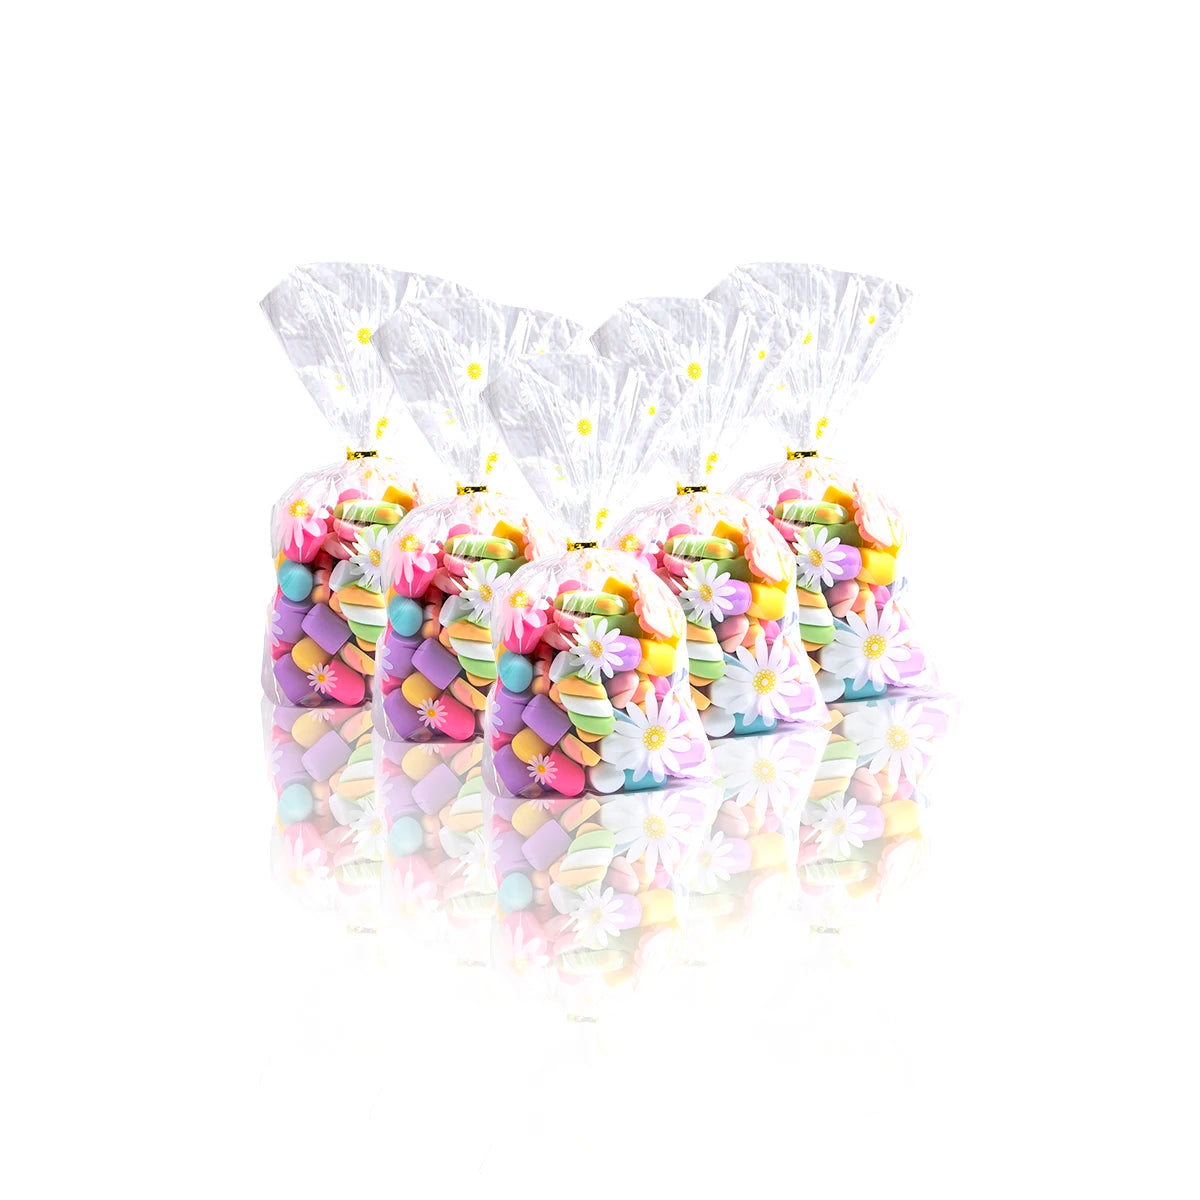 50pcs Daisy Candy Bags Transparent Flower Biscuits Baking Packaging Bag Wedding Birthday Party DIY Gifts Wrapping Supplies